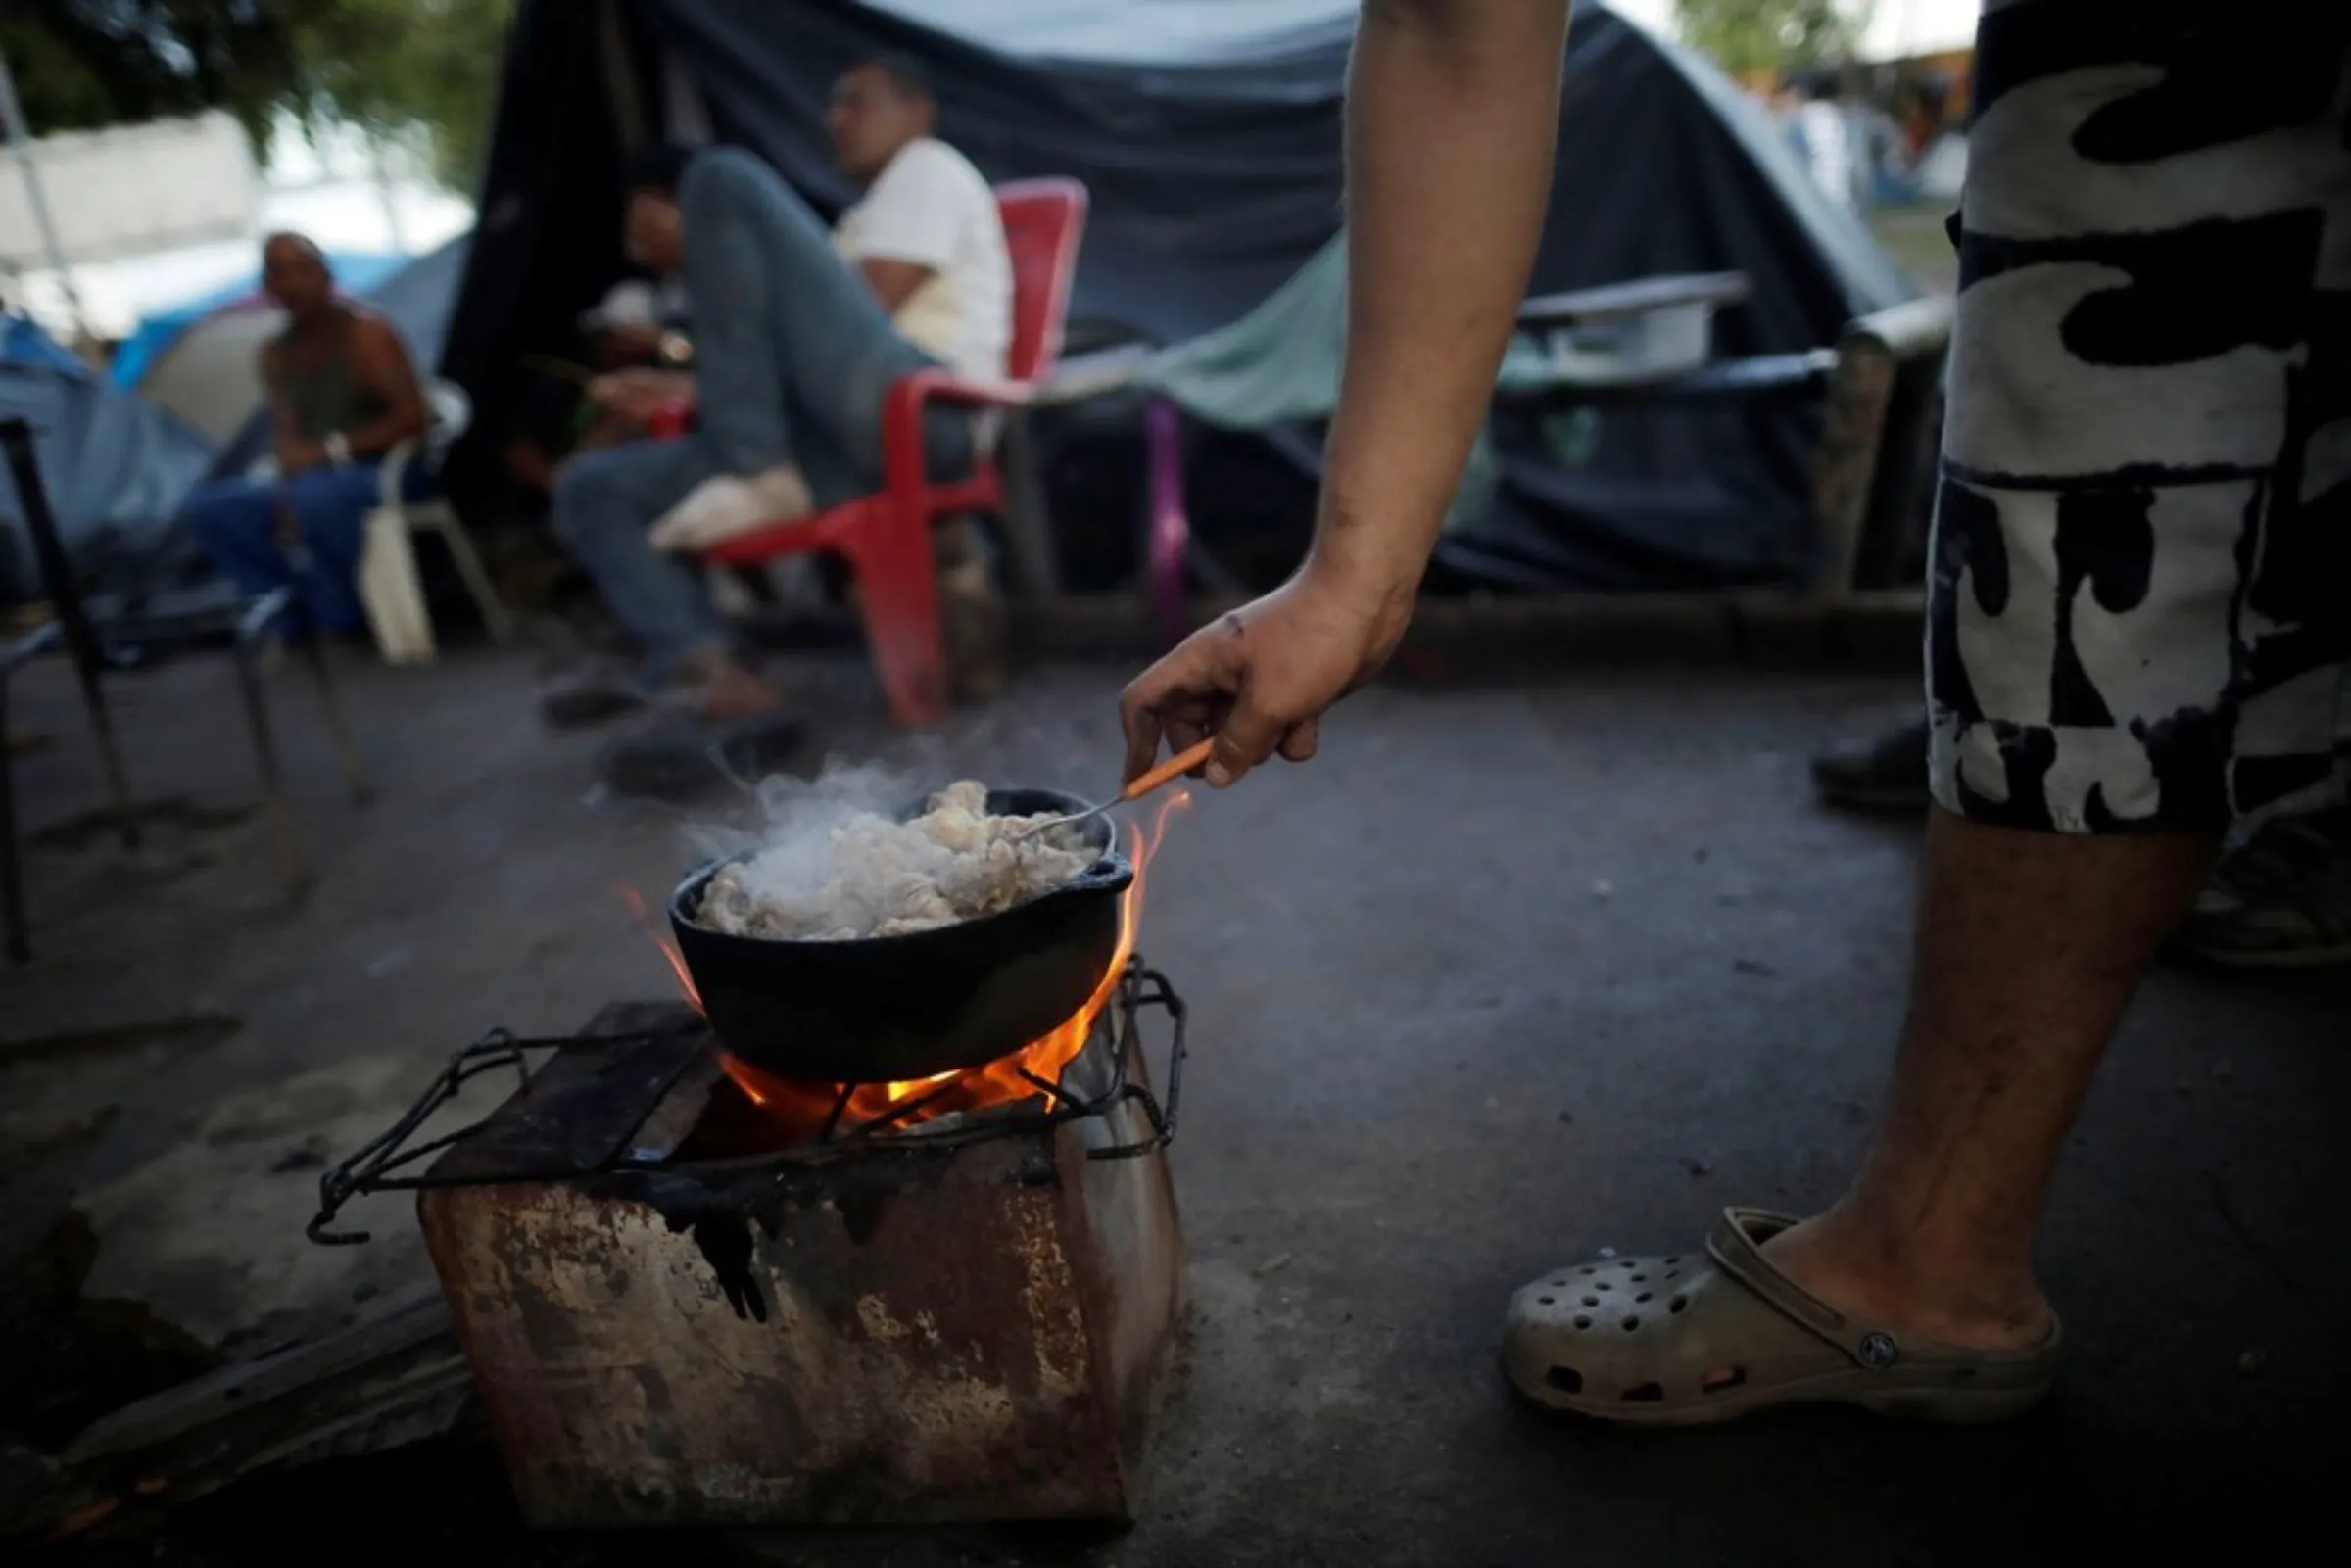 A Venezuelan migrant stands by a stove at a makeshift camp at Simon Bolivar square in Boa Vista, Brazil May 3, 2018